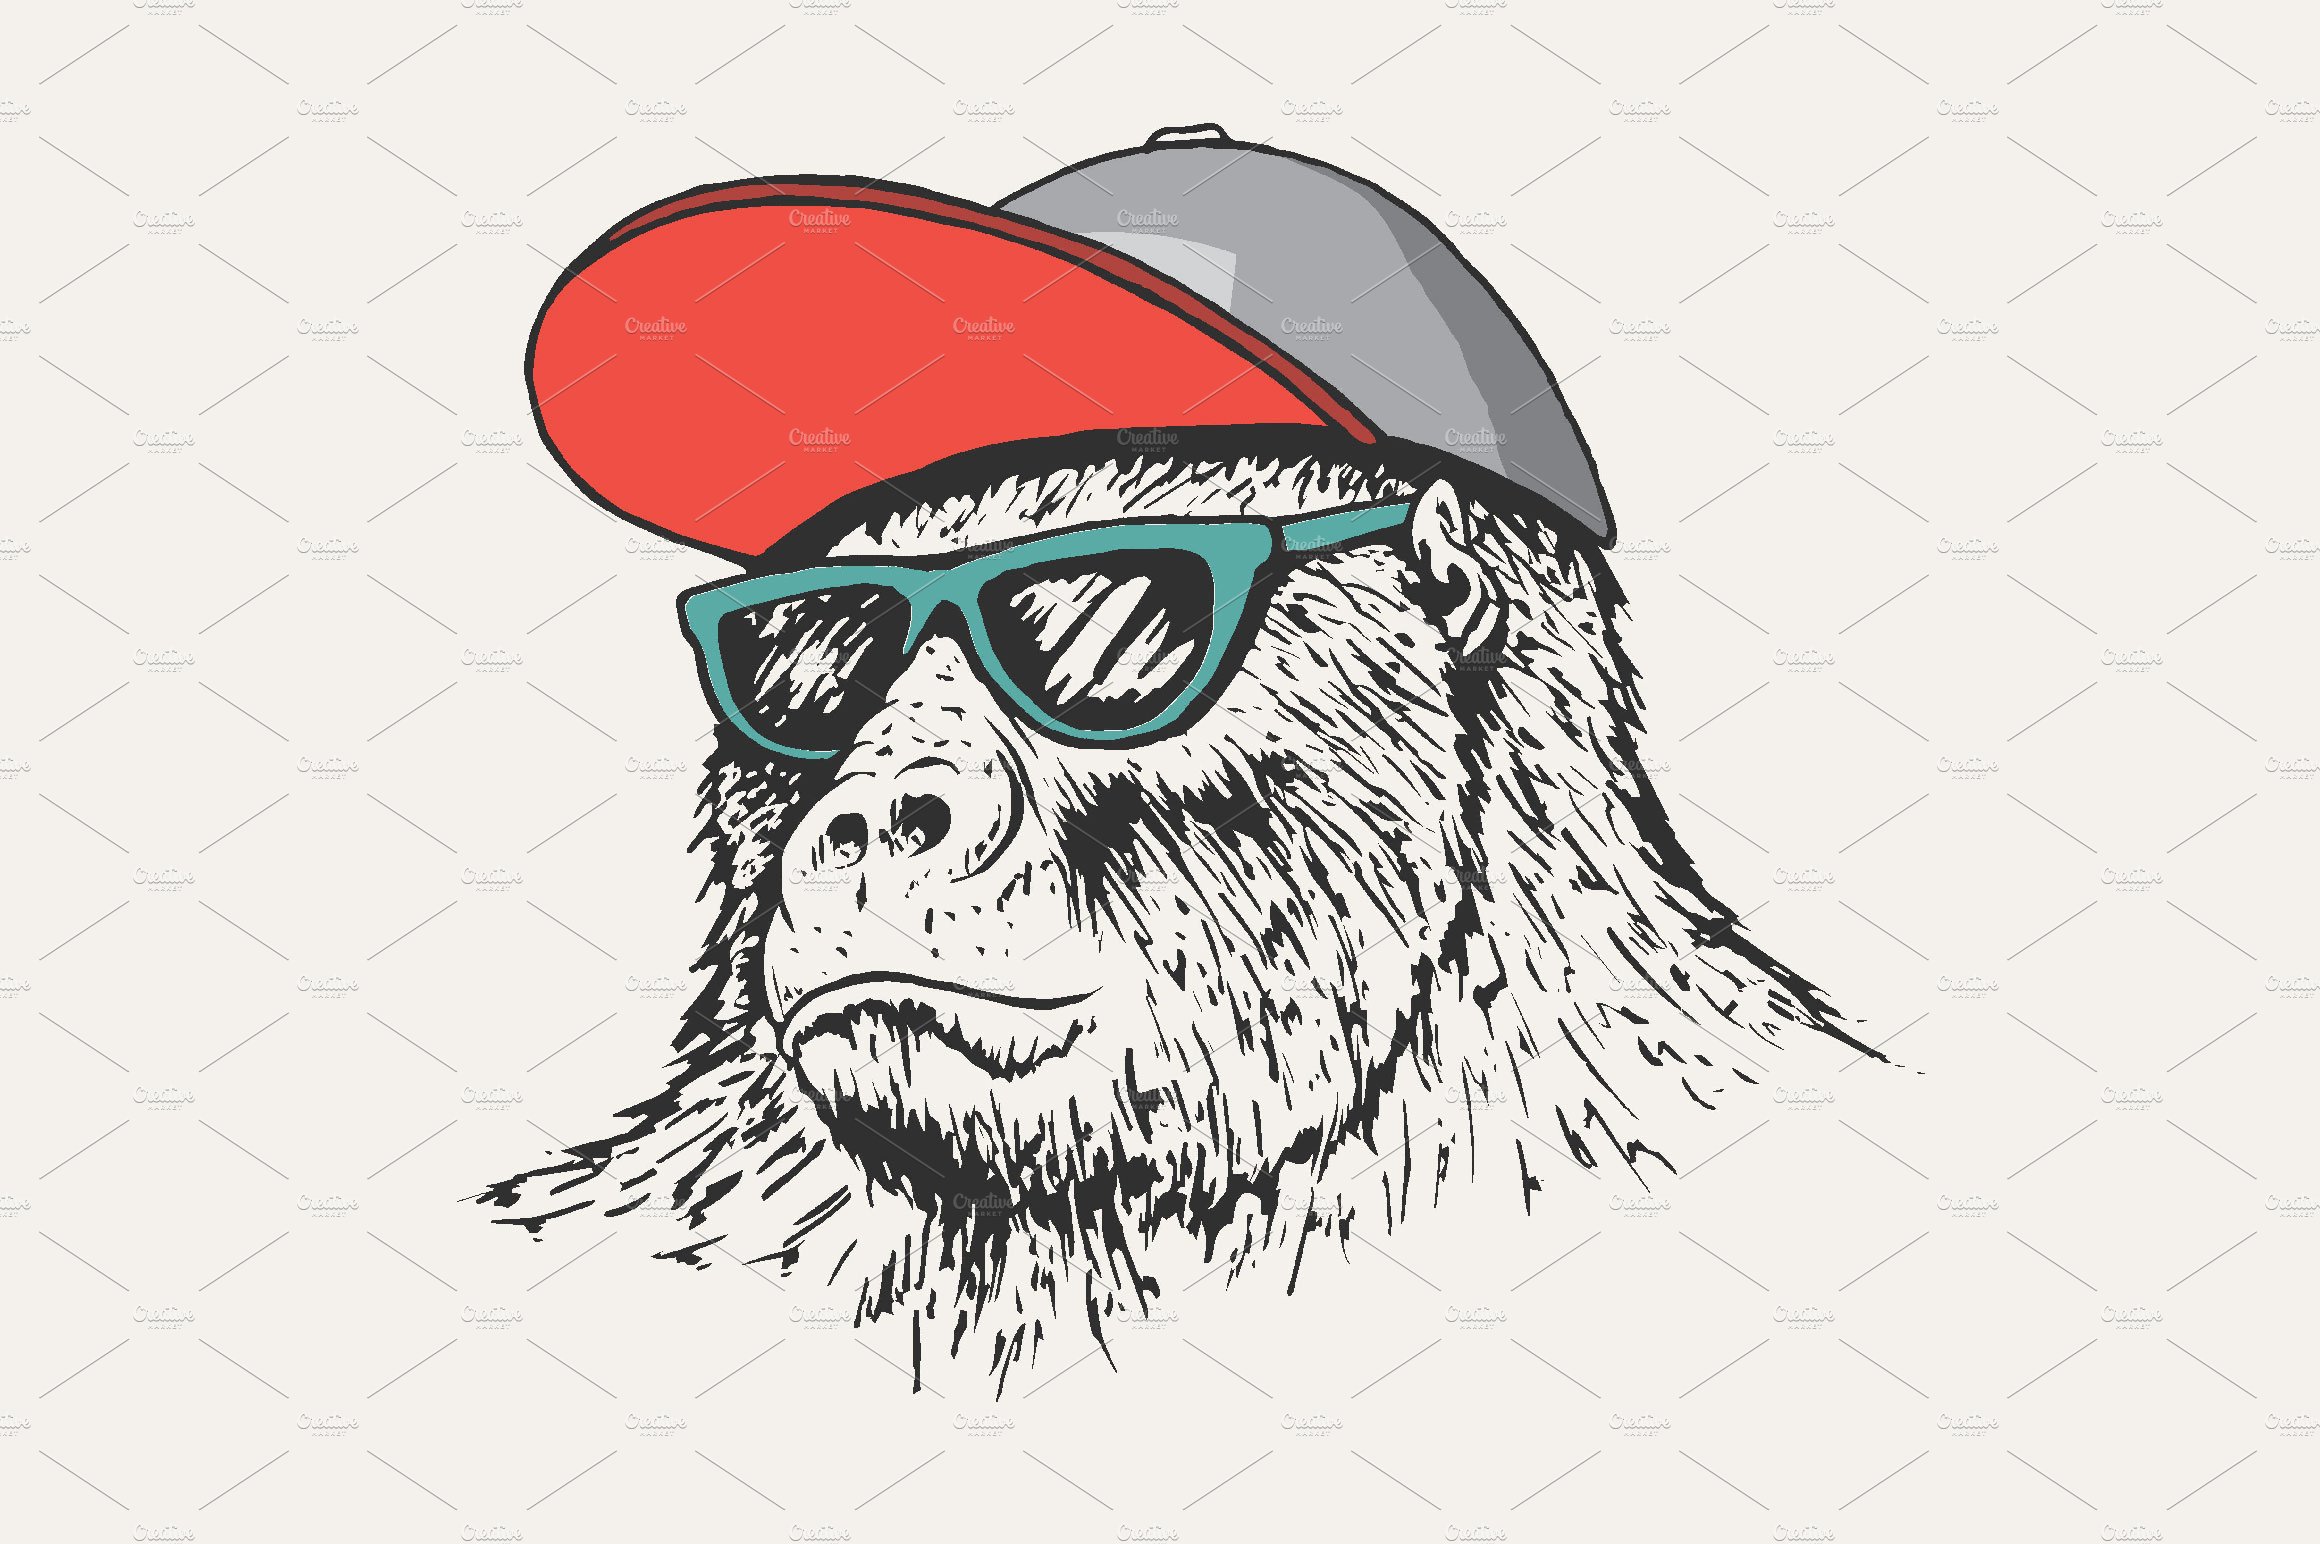 gorilla wearing a cap and sunglasses cover image.